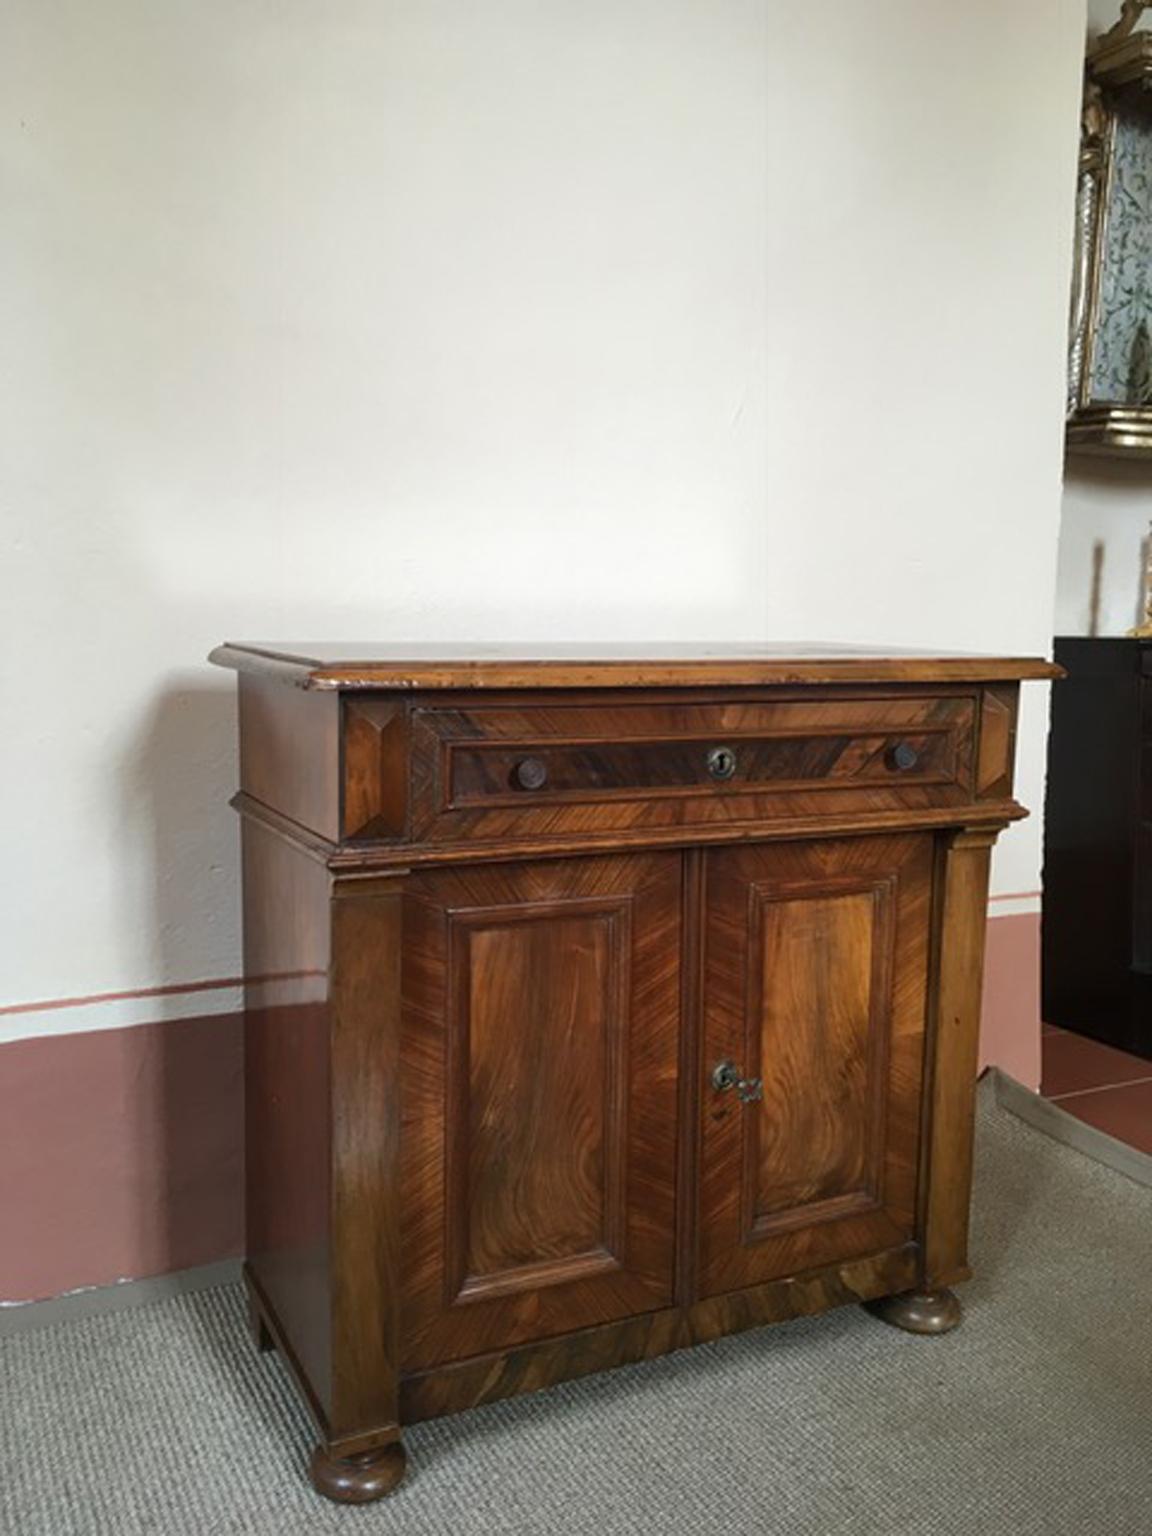 This is a pleasant credenza or low cabinet, handmade in walnut with an inlaid in the same wood.
The top has very beautiful drawing that distinguishes this antique buffet.
Hand made in the North part of Italy.

Recently restored
With certificate